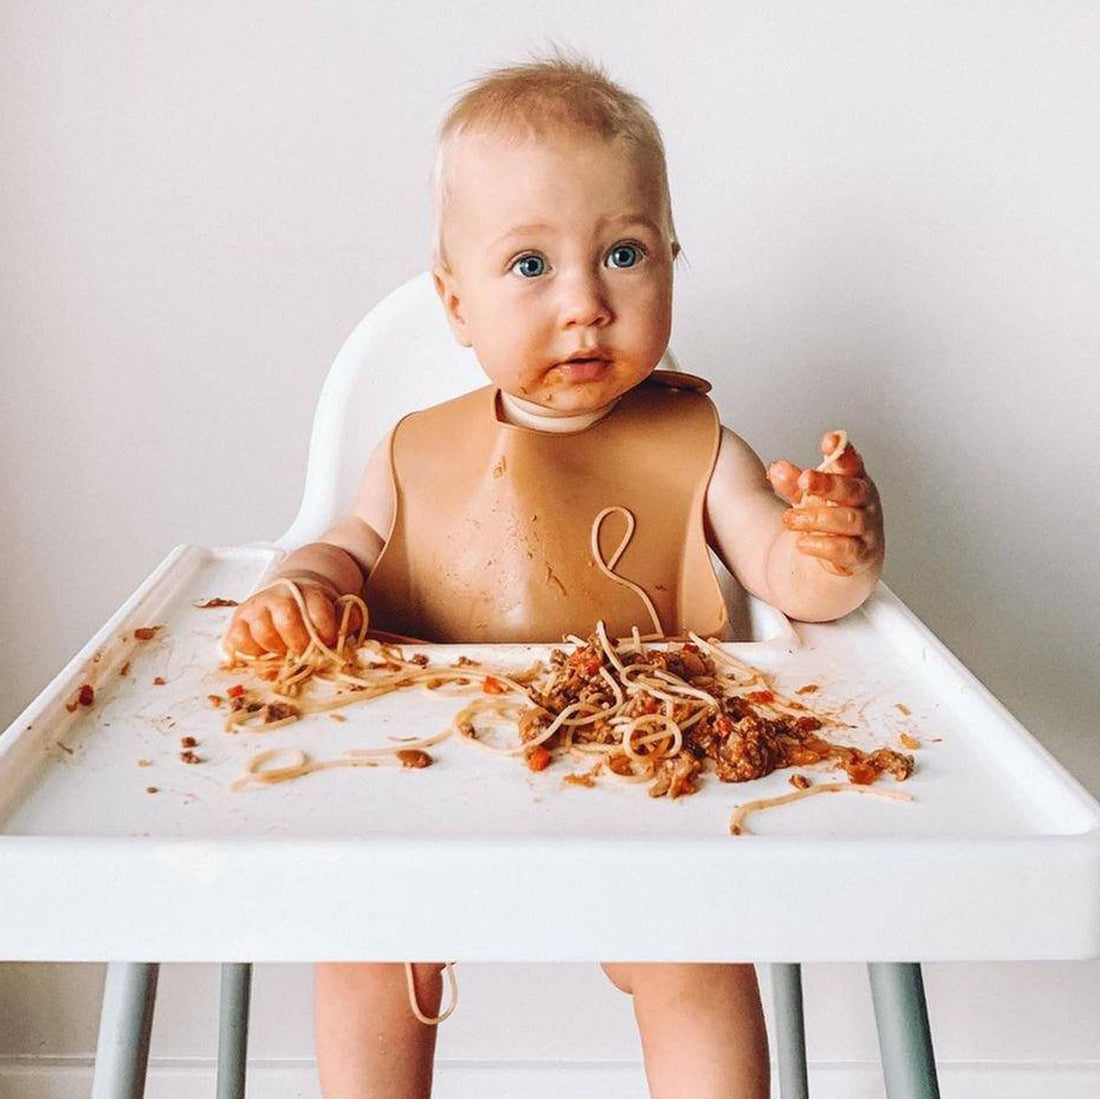 Starting Solids: What You Need To Know